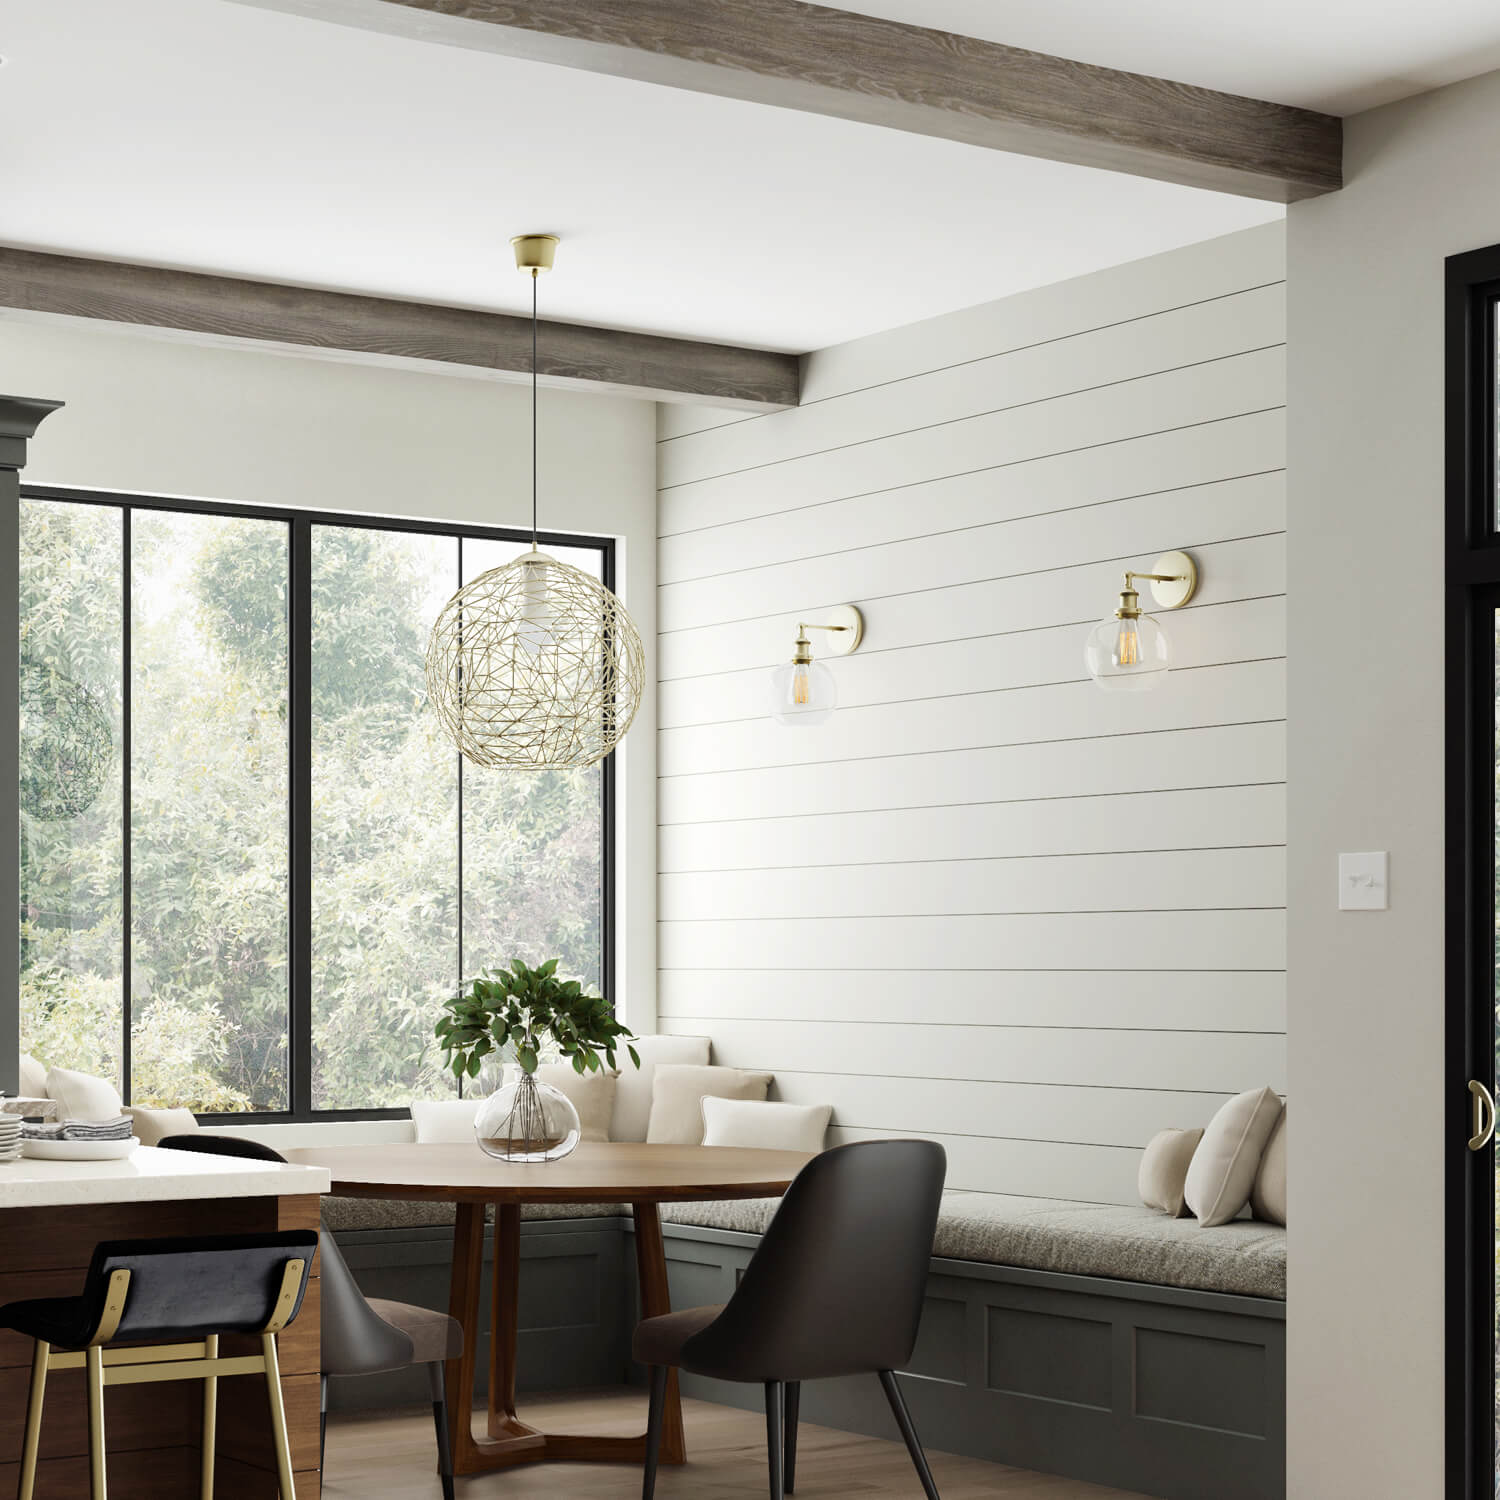 Dark gray-green and rich stained wood kitchen with a breakfast nook and built-in seating in a new modern farmhouse. A shiplap accent wall adds a farmhouse style to the dining area.